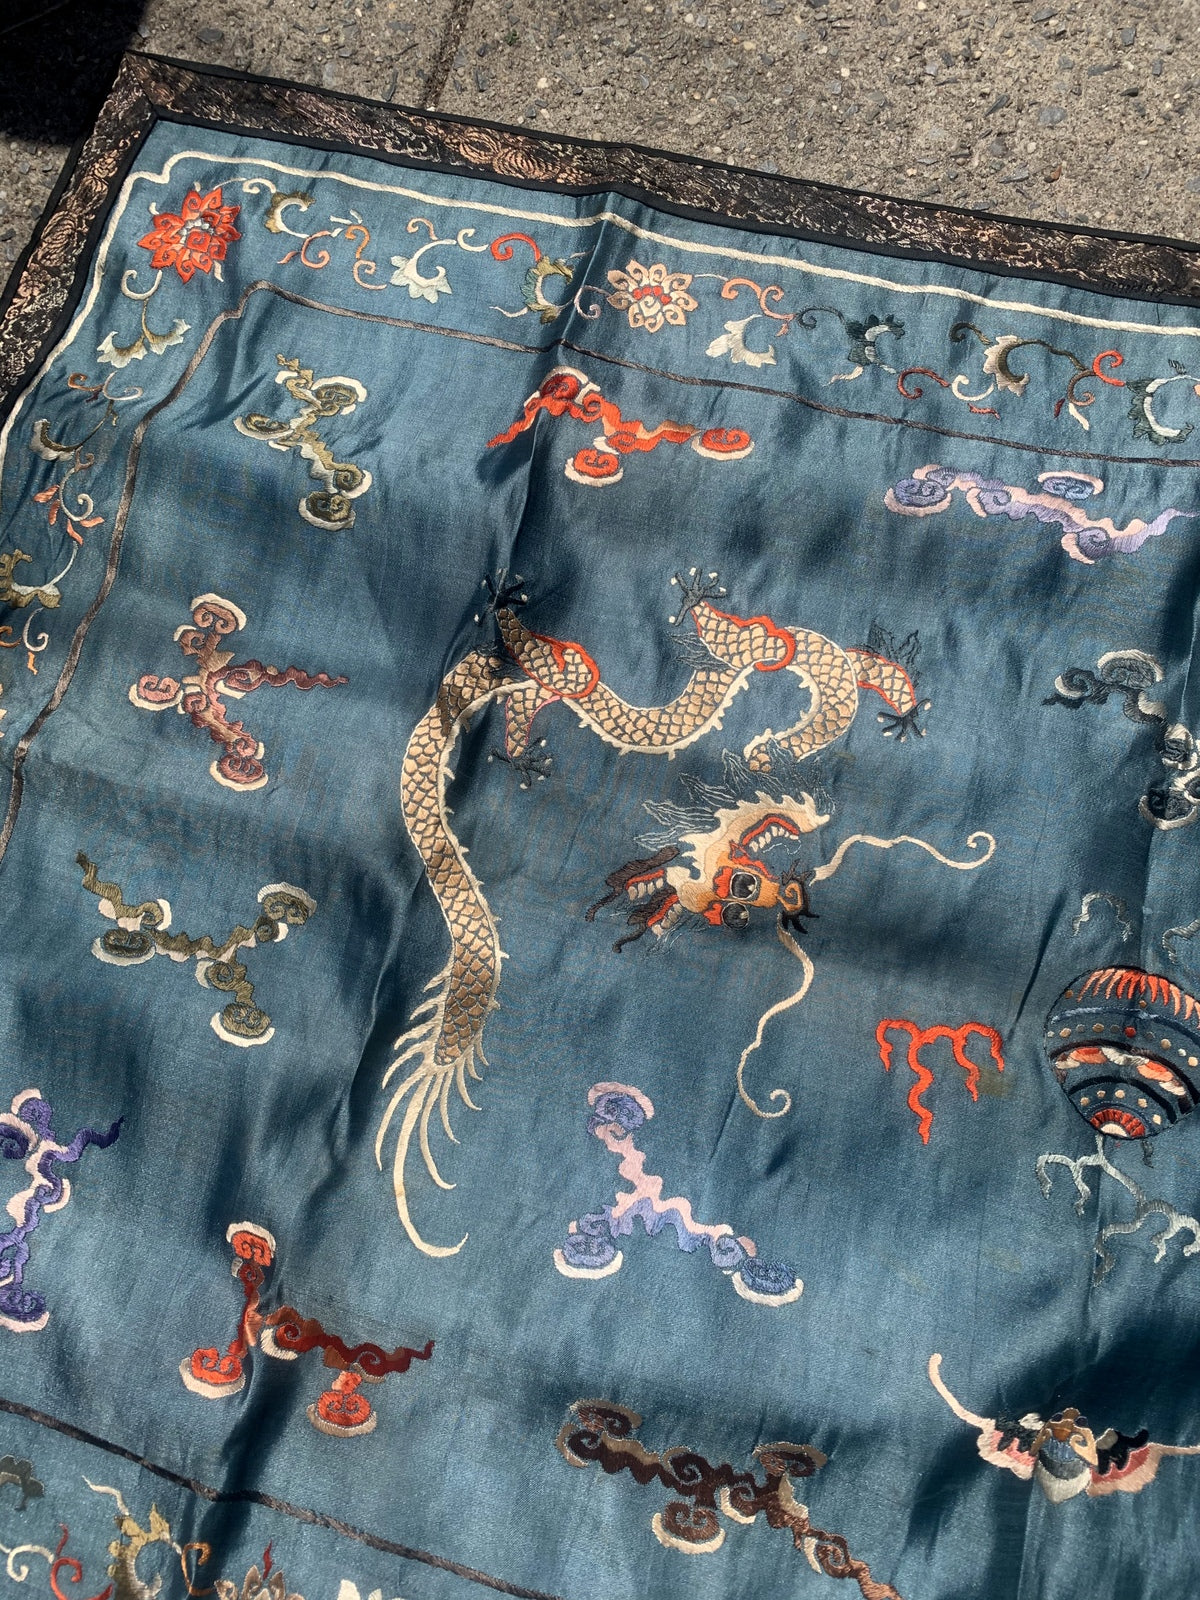 Handmade antique Chinese collectible silk textile 1870s